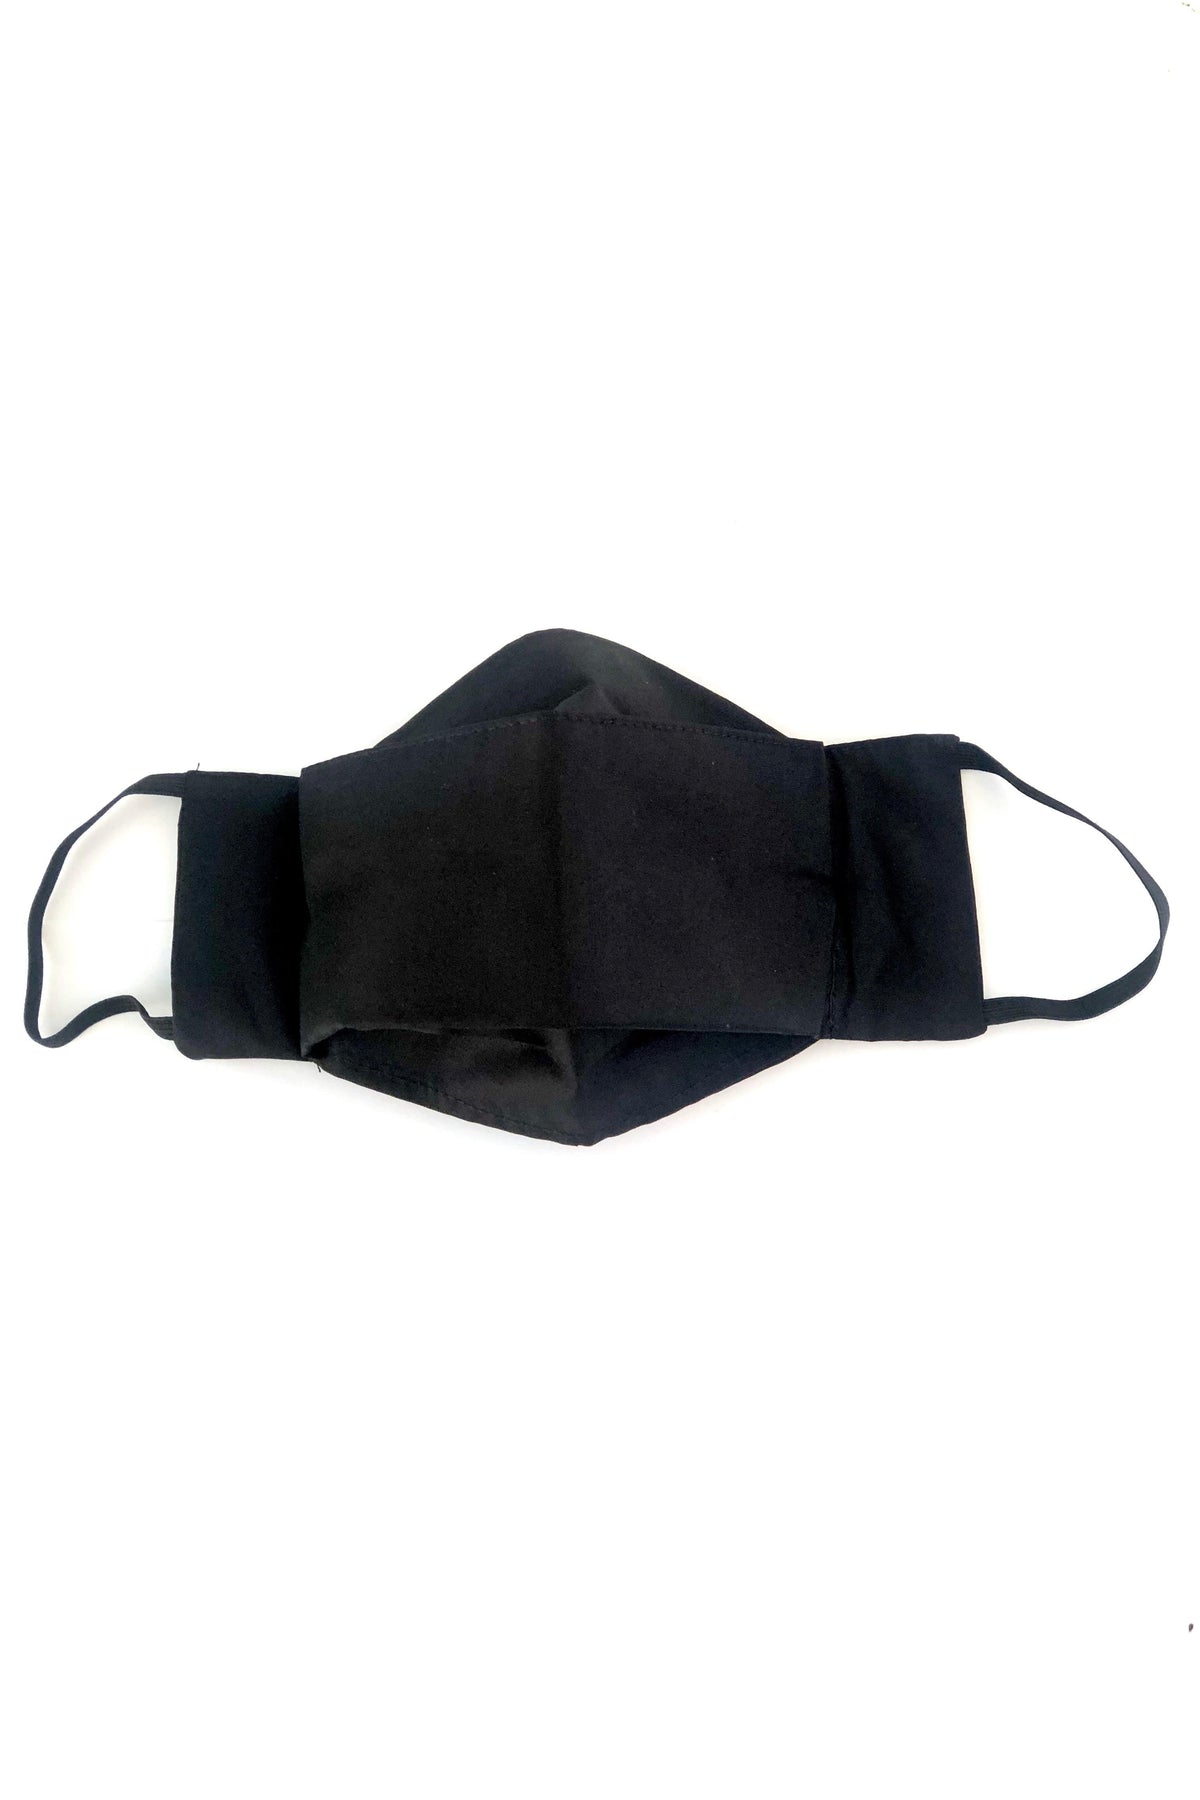 Box Pleated Face Masks Box Pleated Cotton Mask with Filter Pocket - Black - Chloe Dao